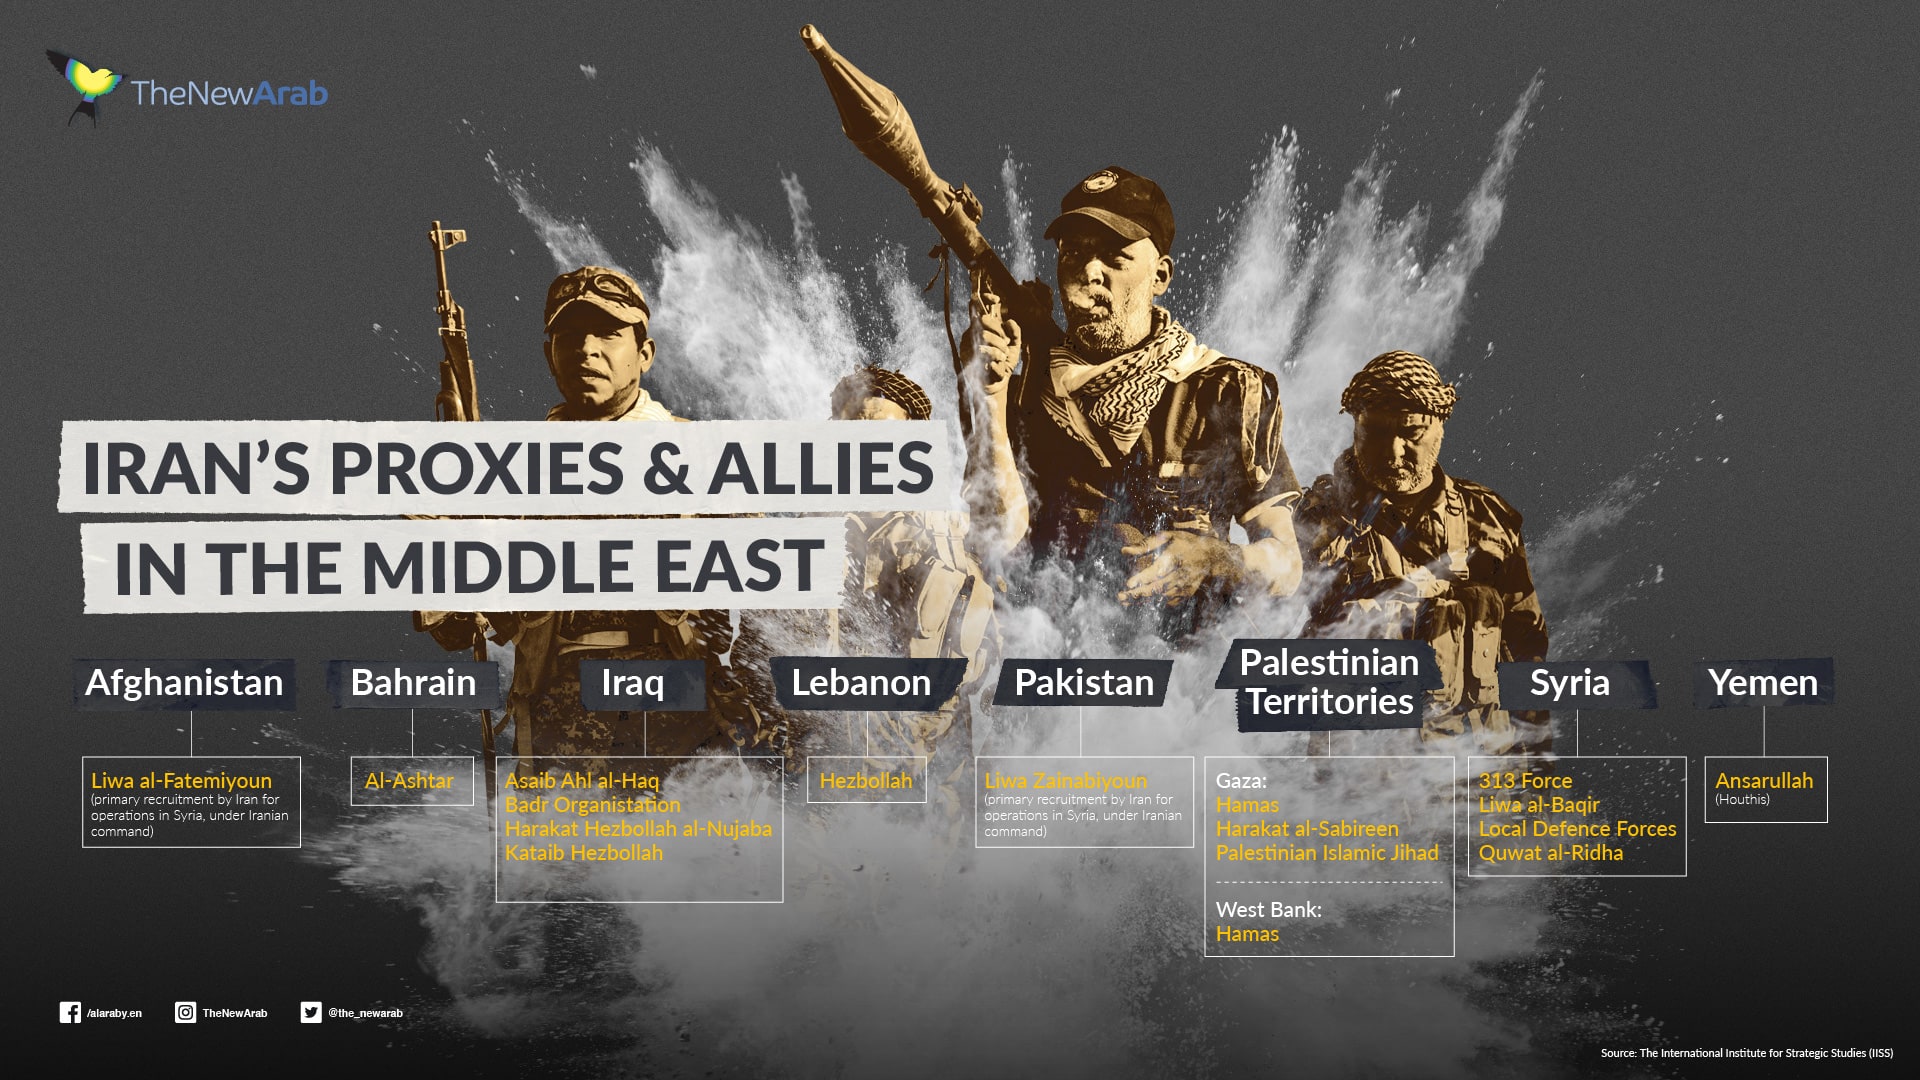 Iran's proxies and allies in the Middle East